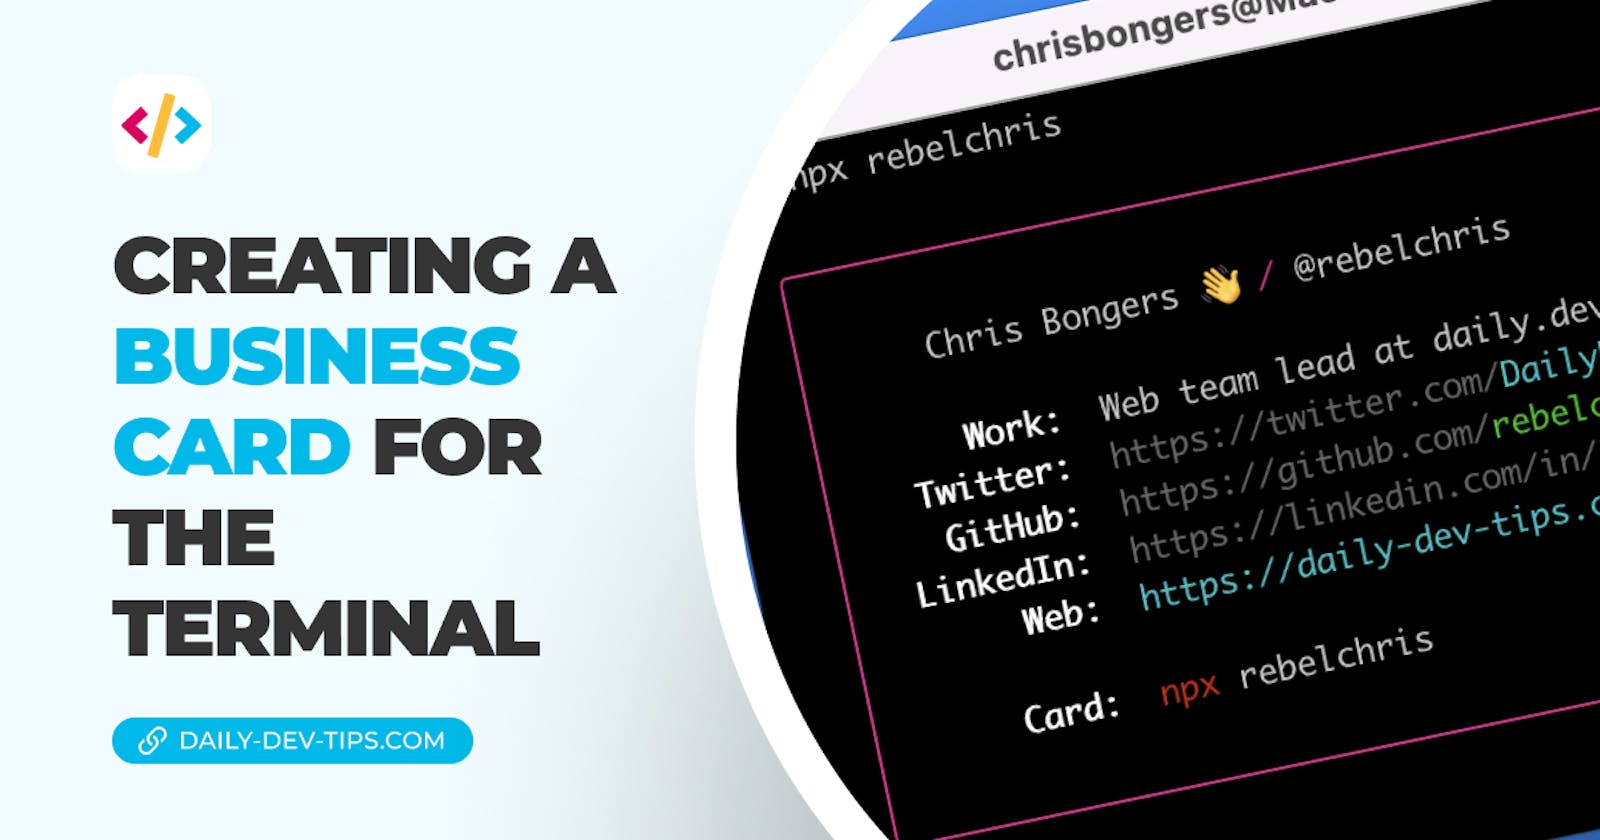 Creating a business card for the terminal